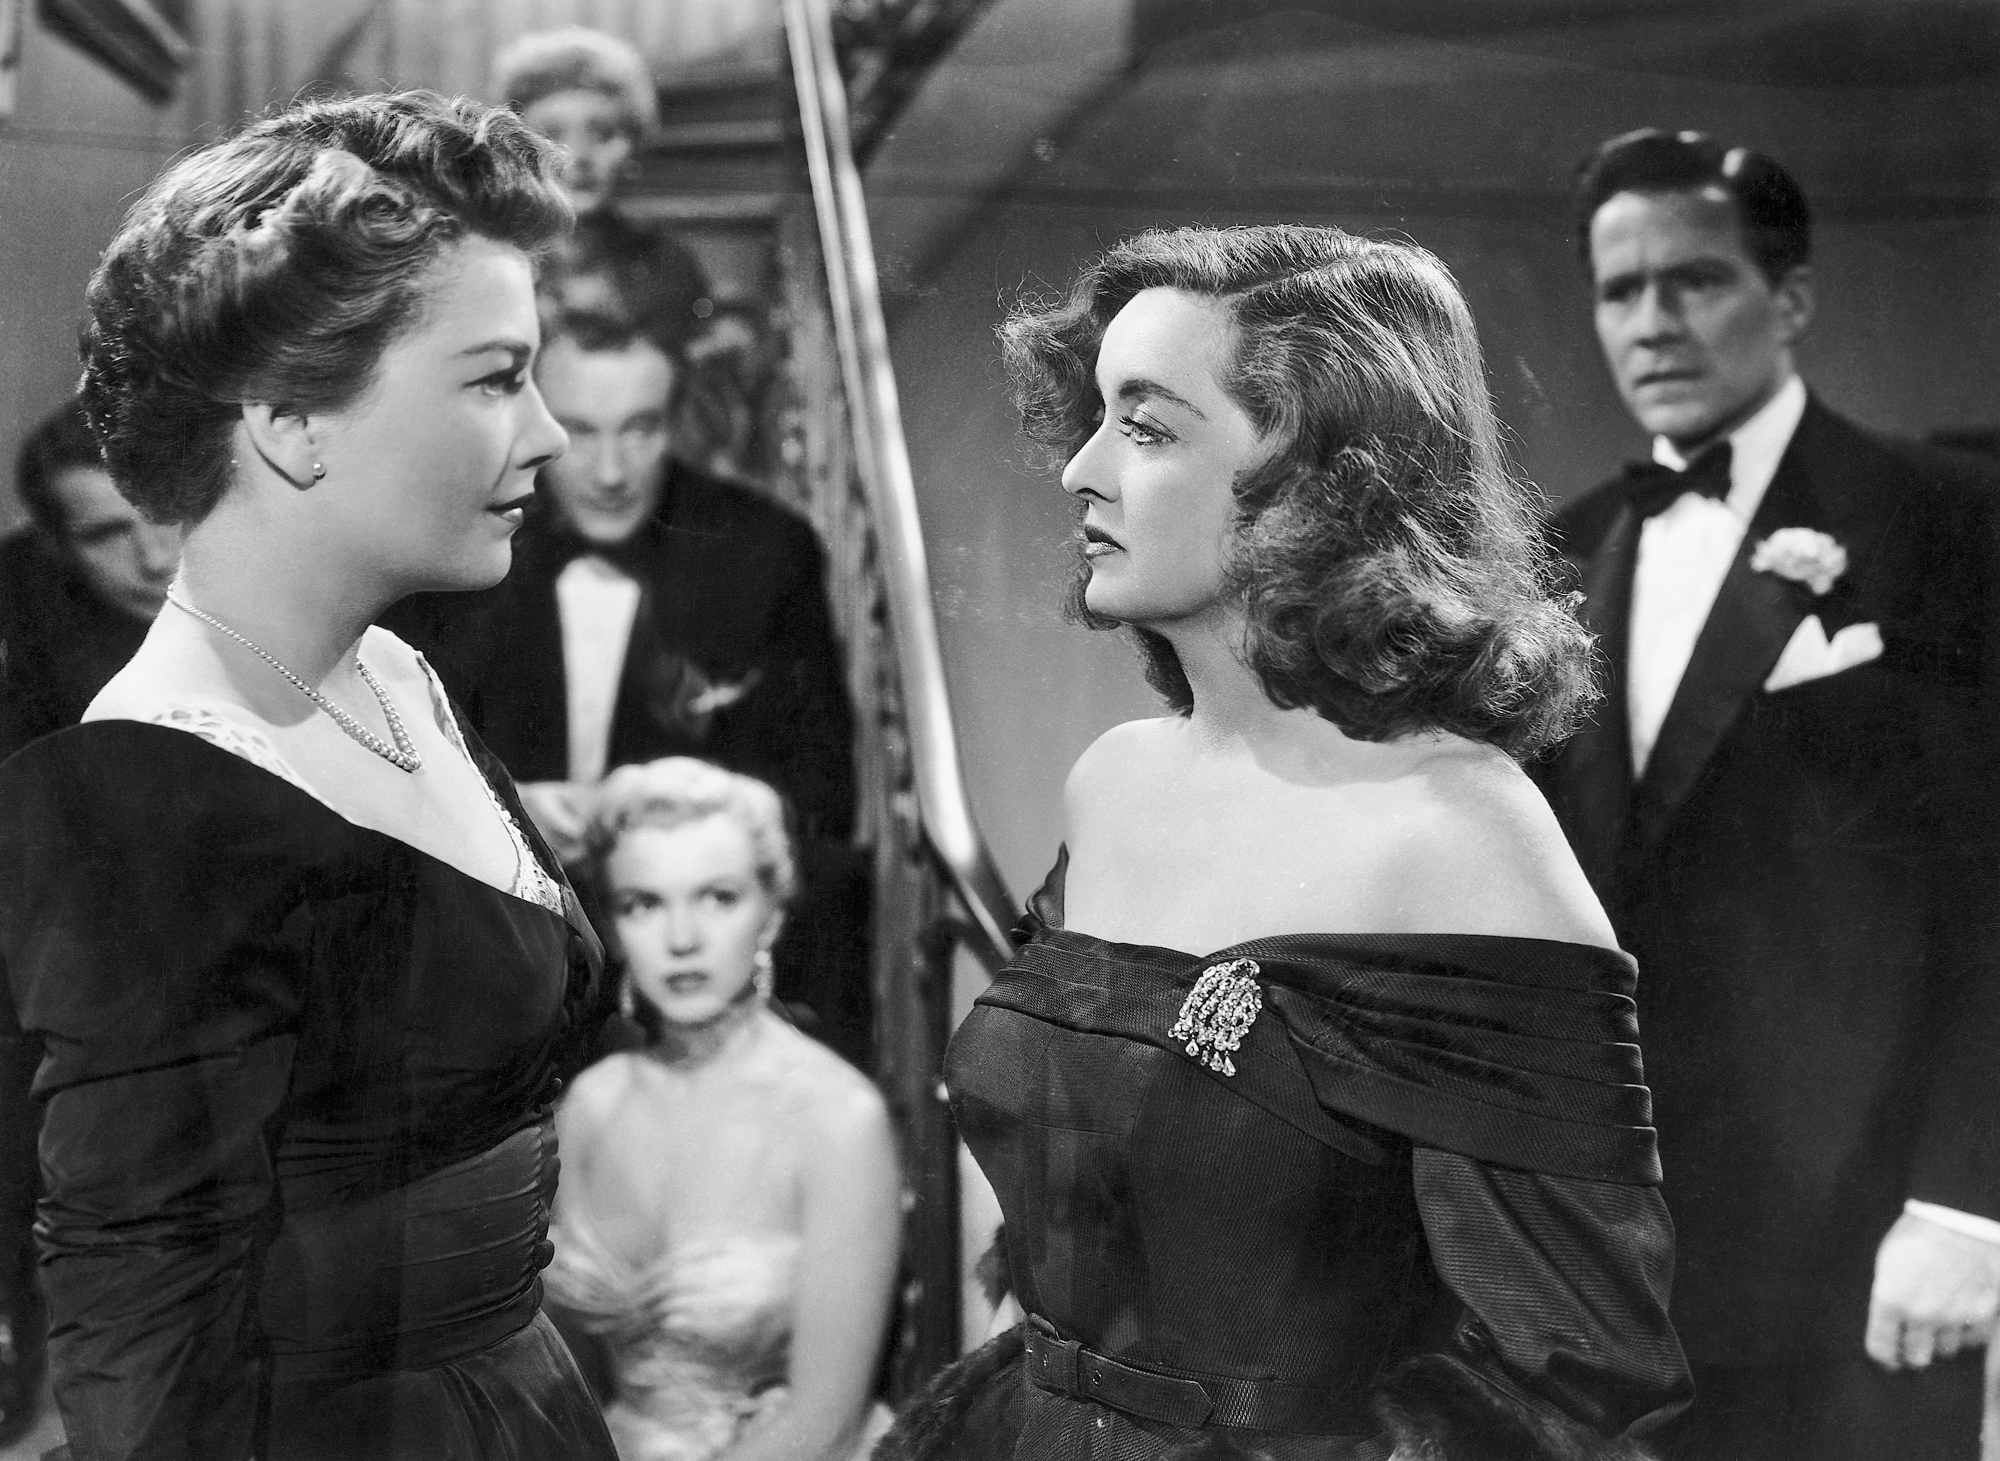 'All About Eve' Bette Davis as Margo and Anne Baxter as Eve looking at one another intensely with onlookers standing behind them on a staircase.